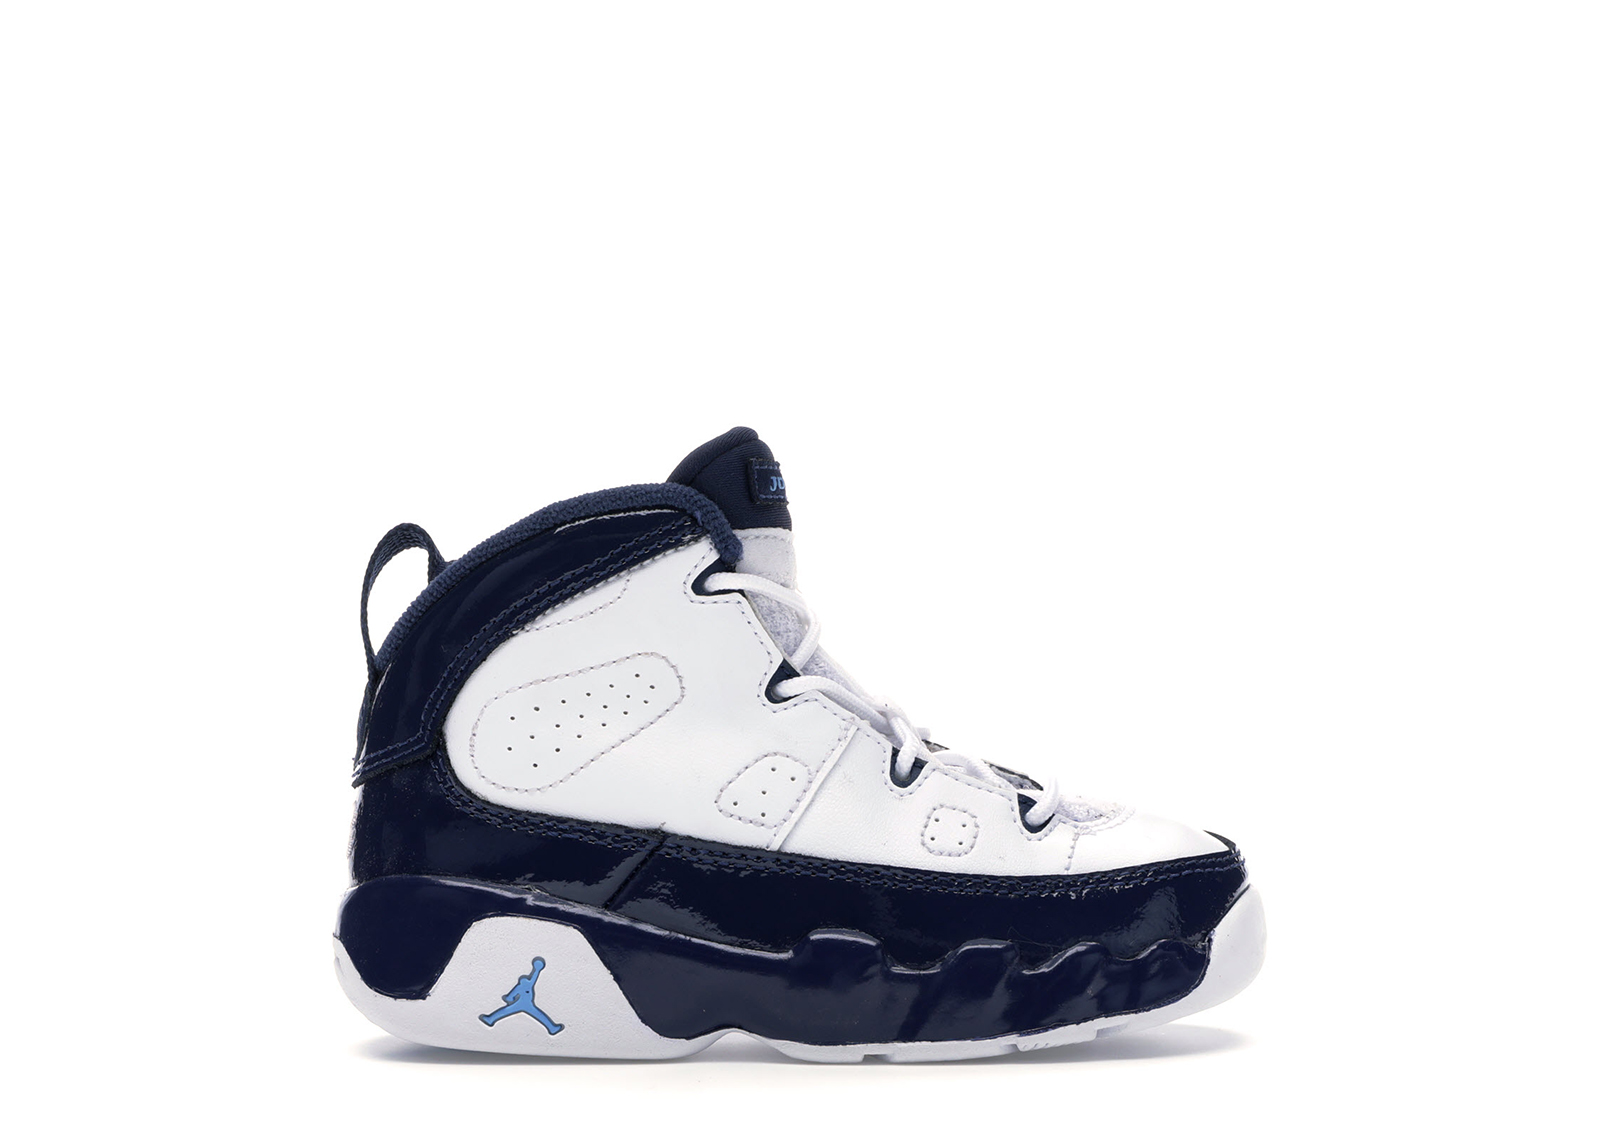 pearl 9s release date